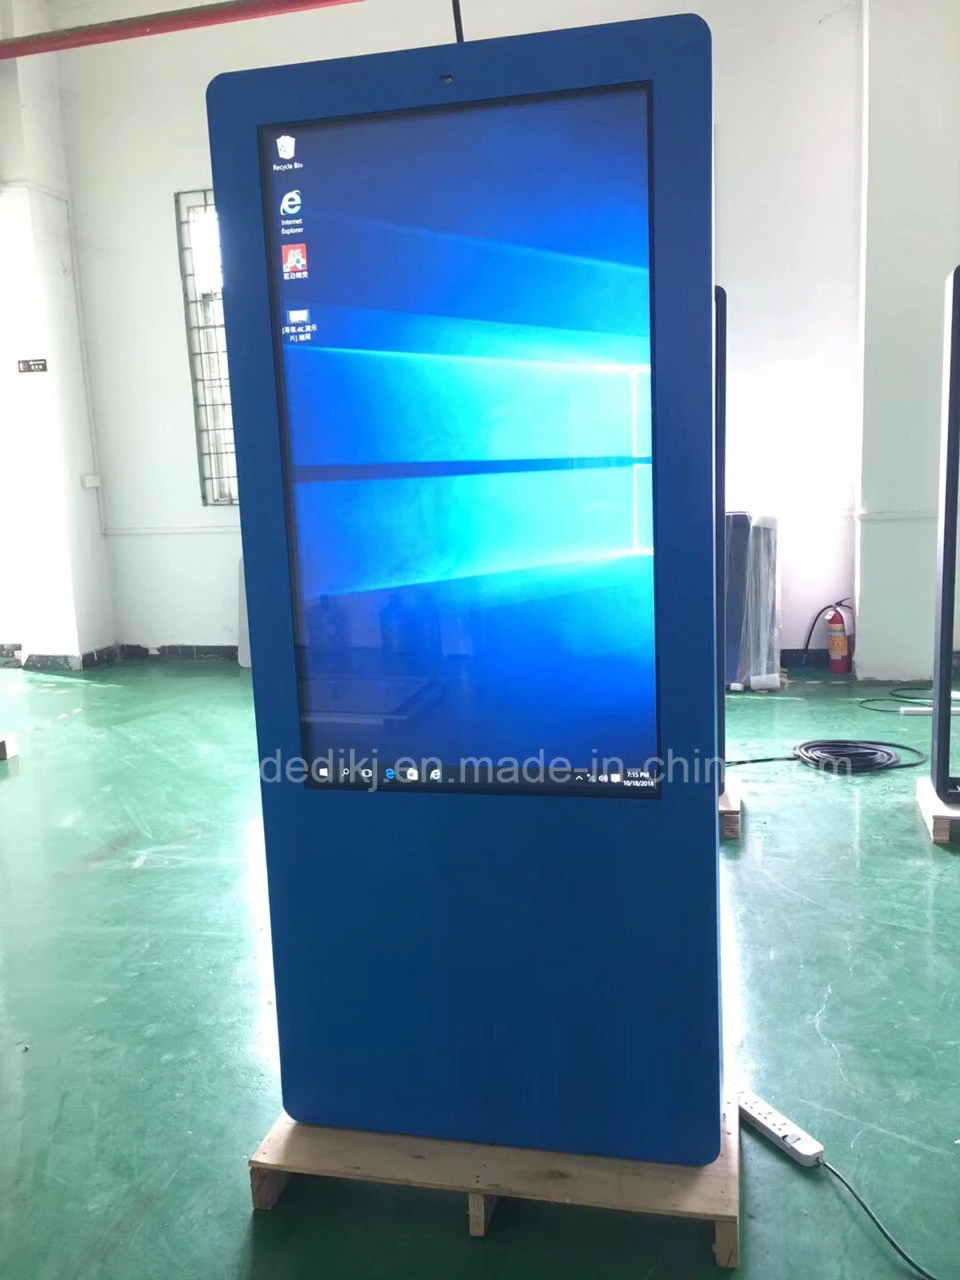 Dedi Factory Hot Product Waterproof Electronic LCD Outdoor Digital Signage Video LCD Totem